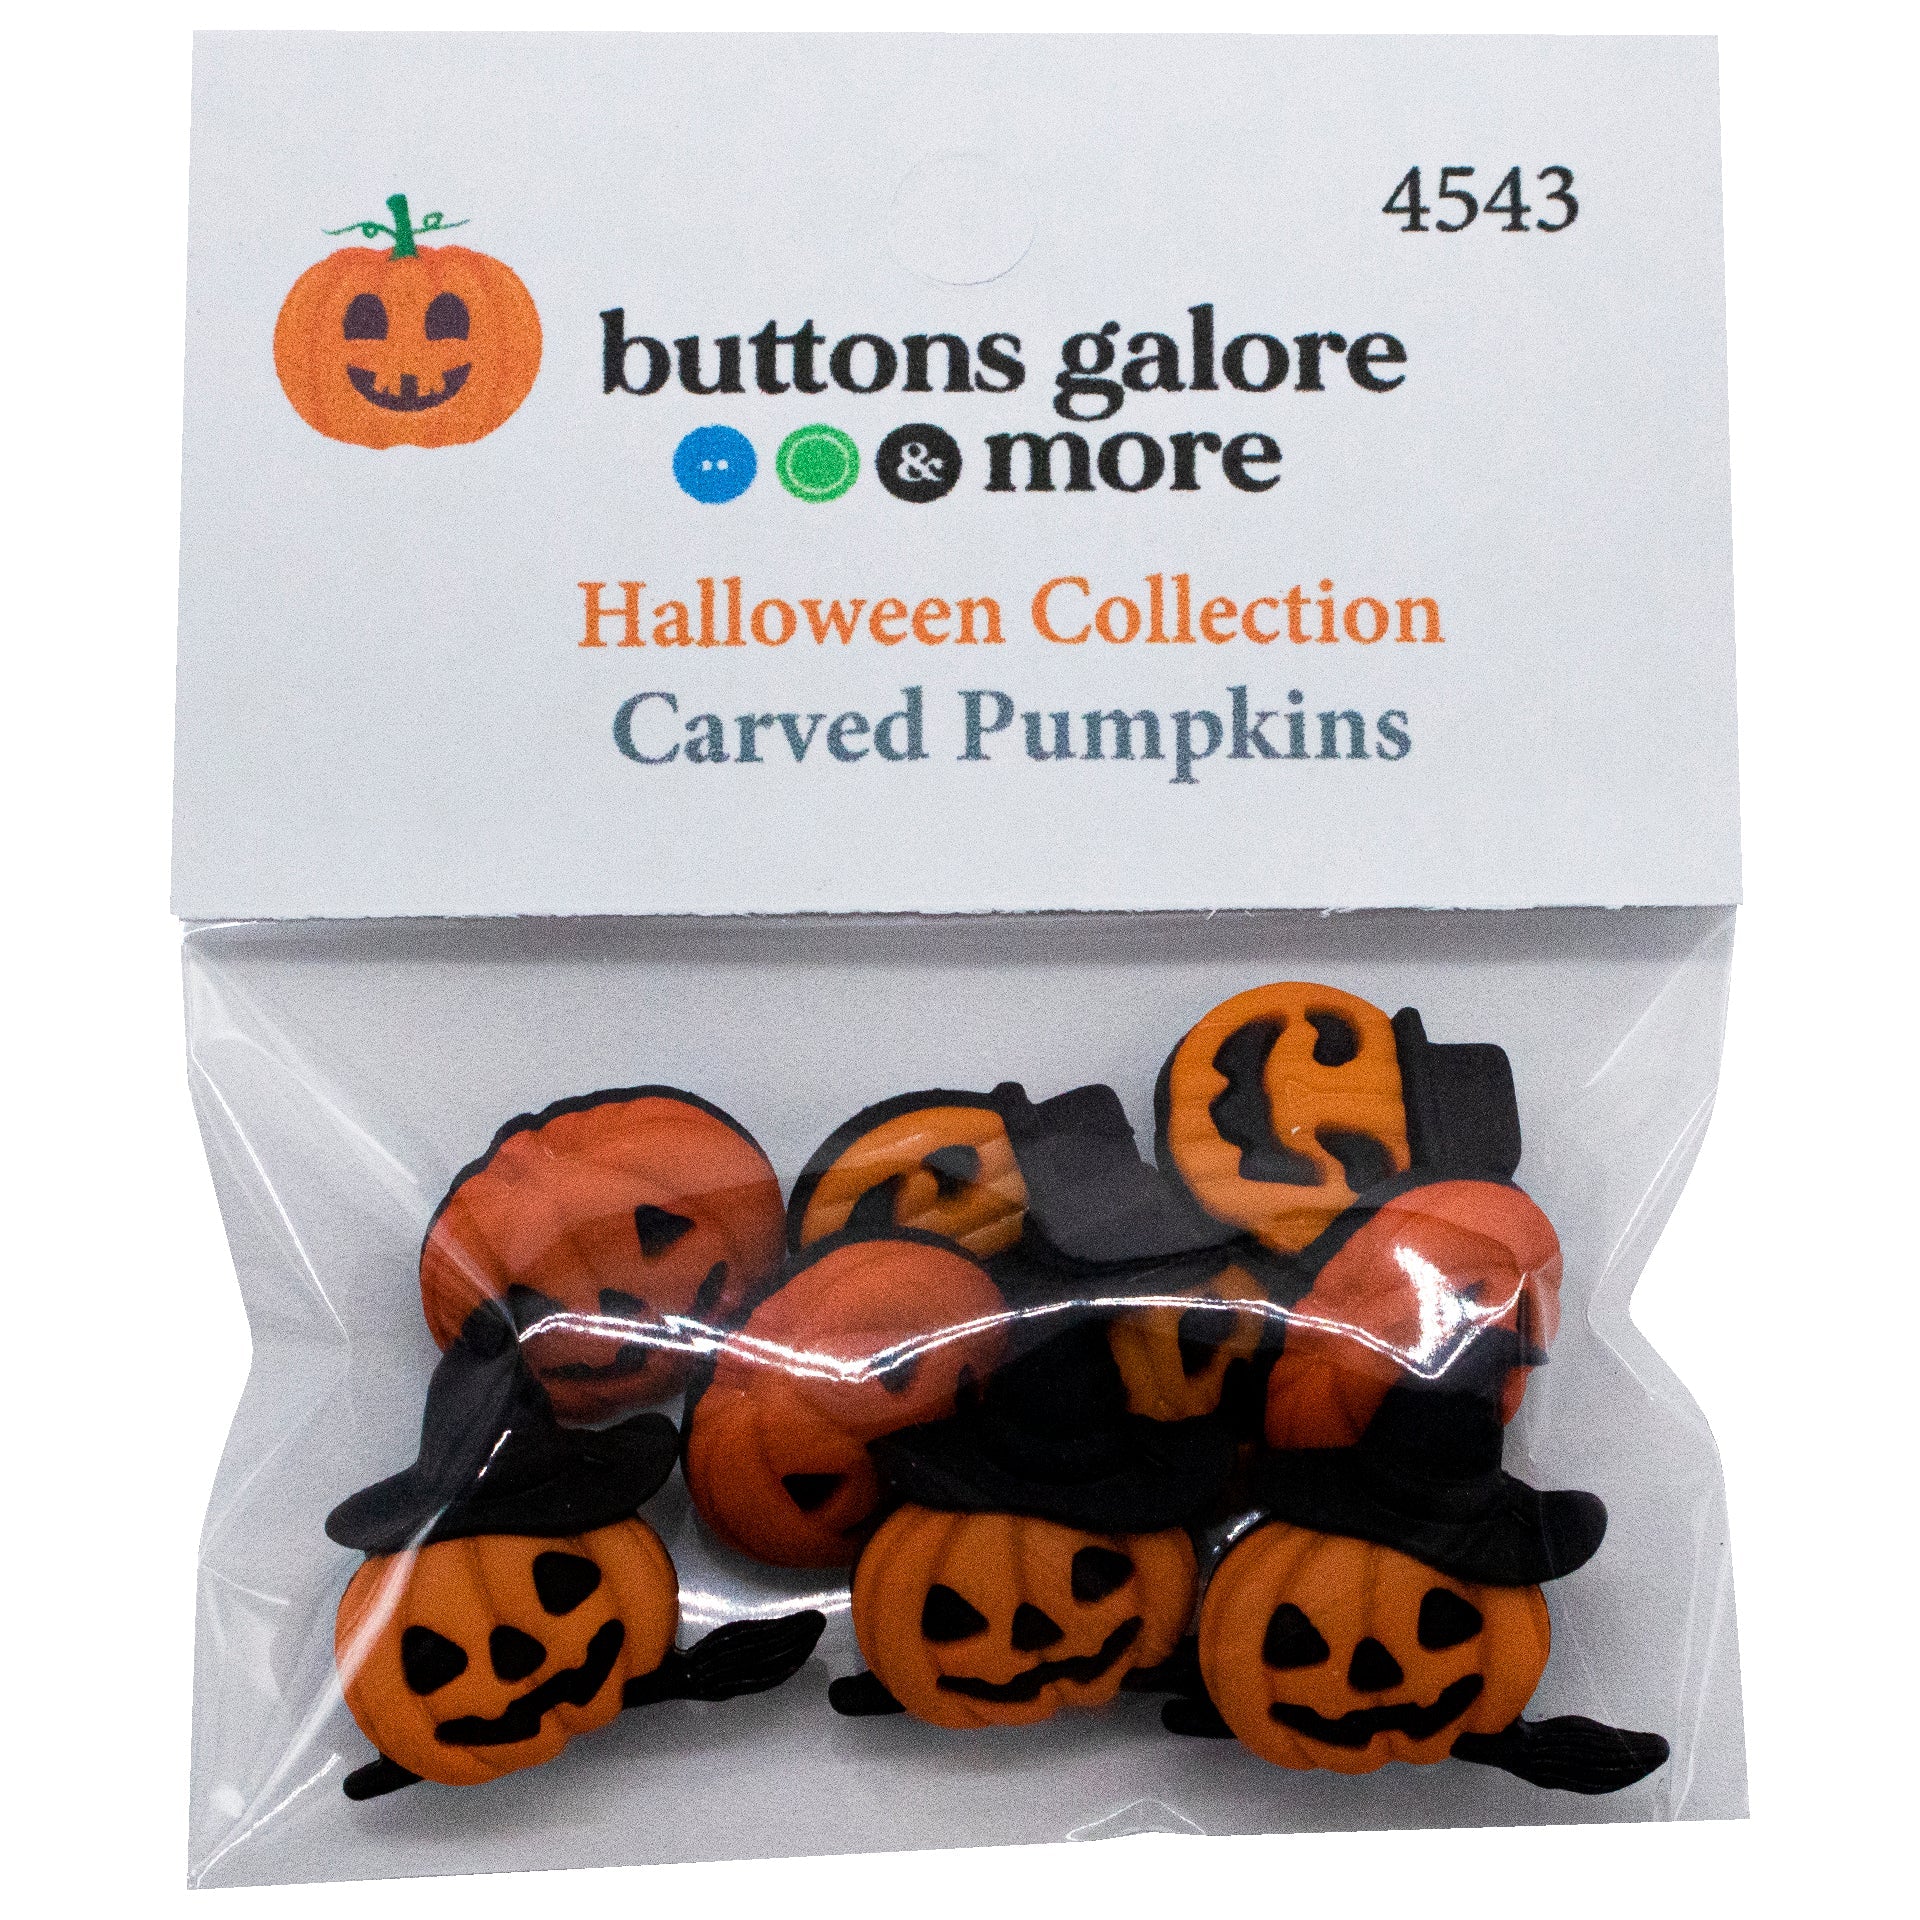 Carved Pumpkins - Buttons Galore and More